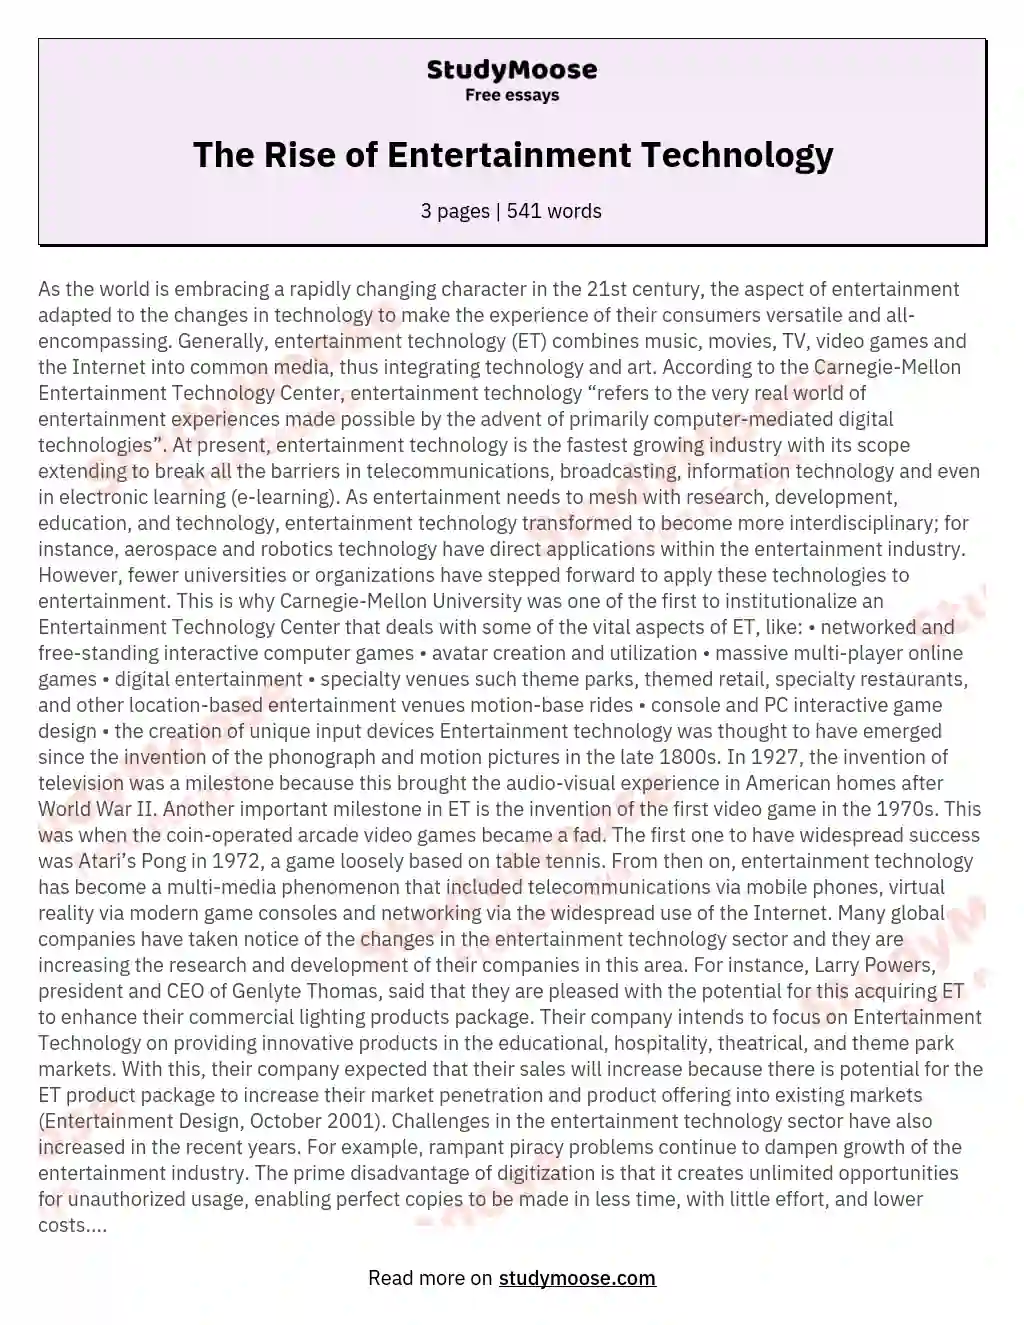 The Rise of Entertainment Technology essay